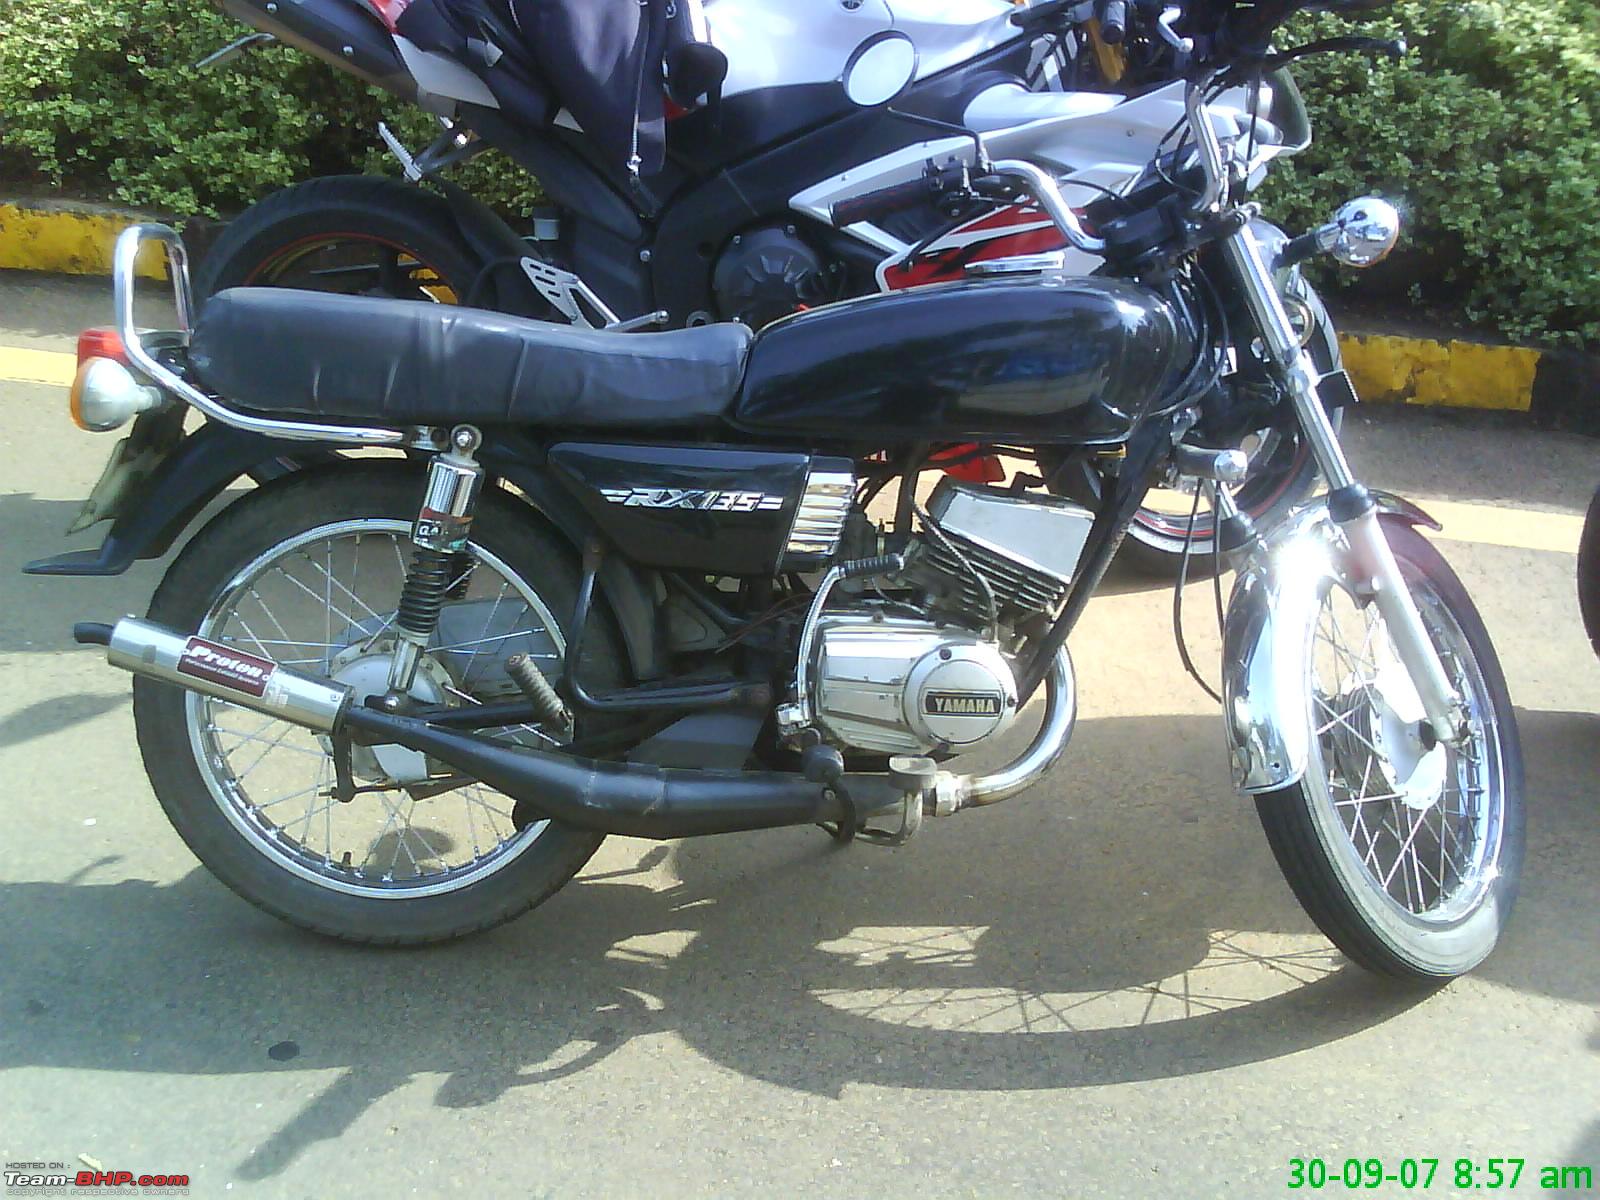 My Yamaha Rx100 Cafe Racer Modification Thread Dec 09 Back To